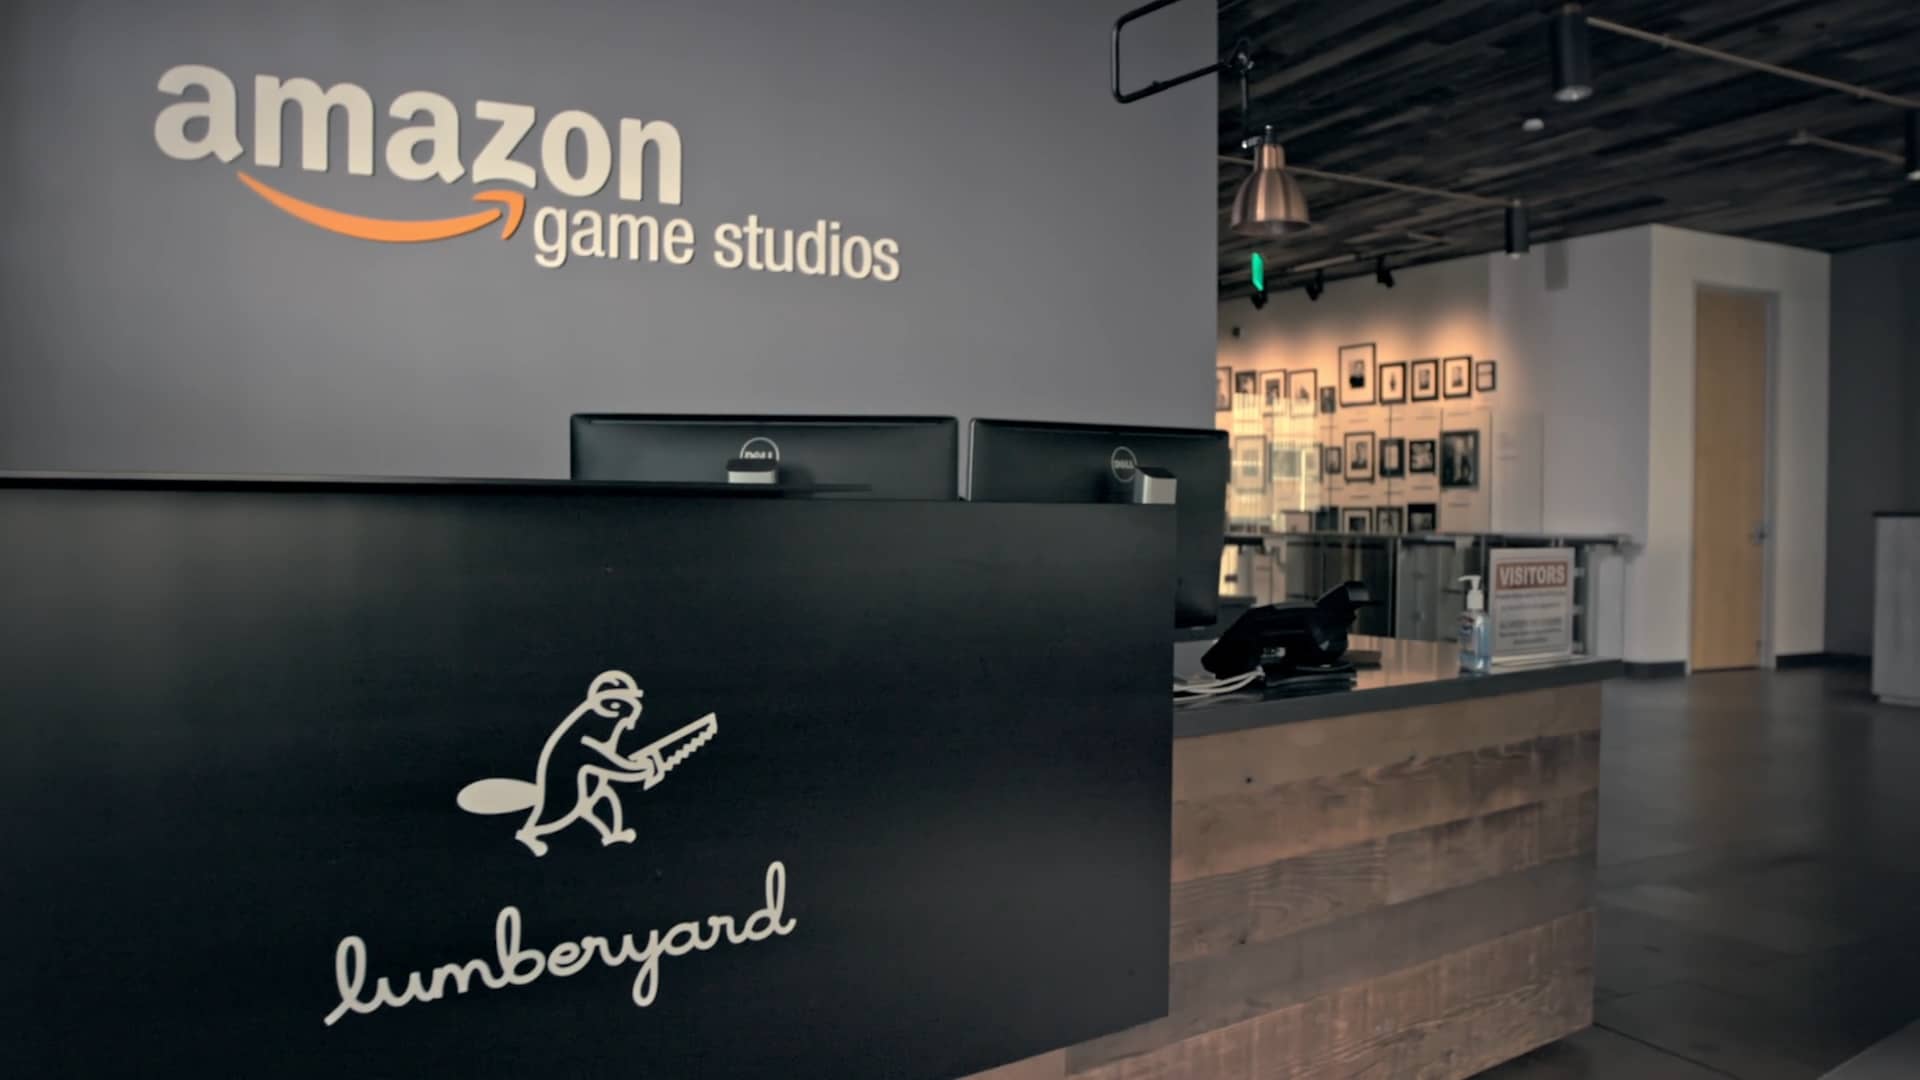 Amazon Game Studios Lay Off Swath Of Employees On Last Day Of E3 2019